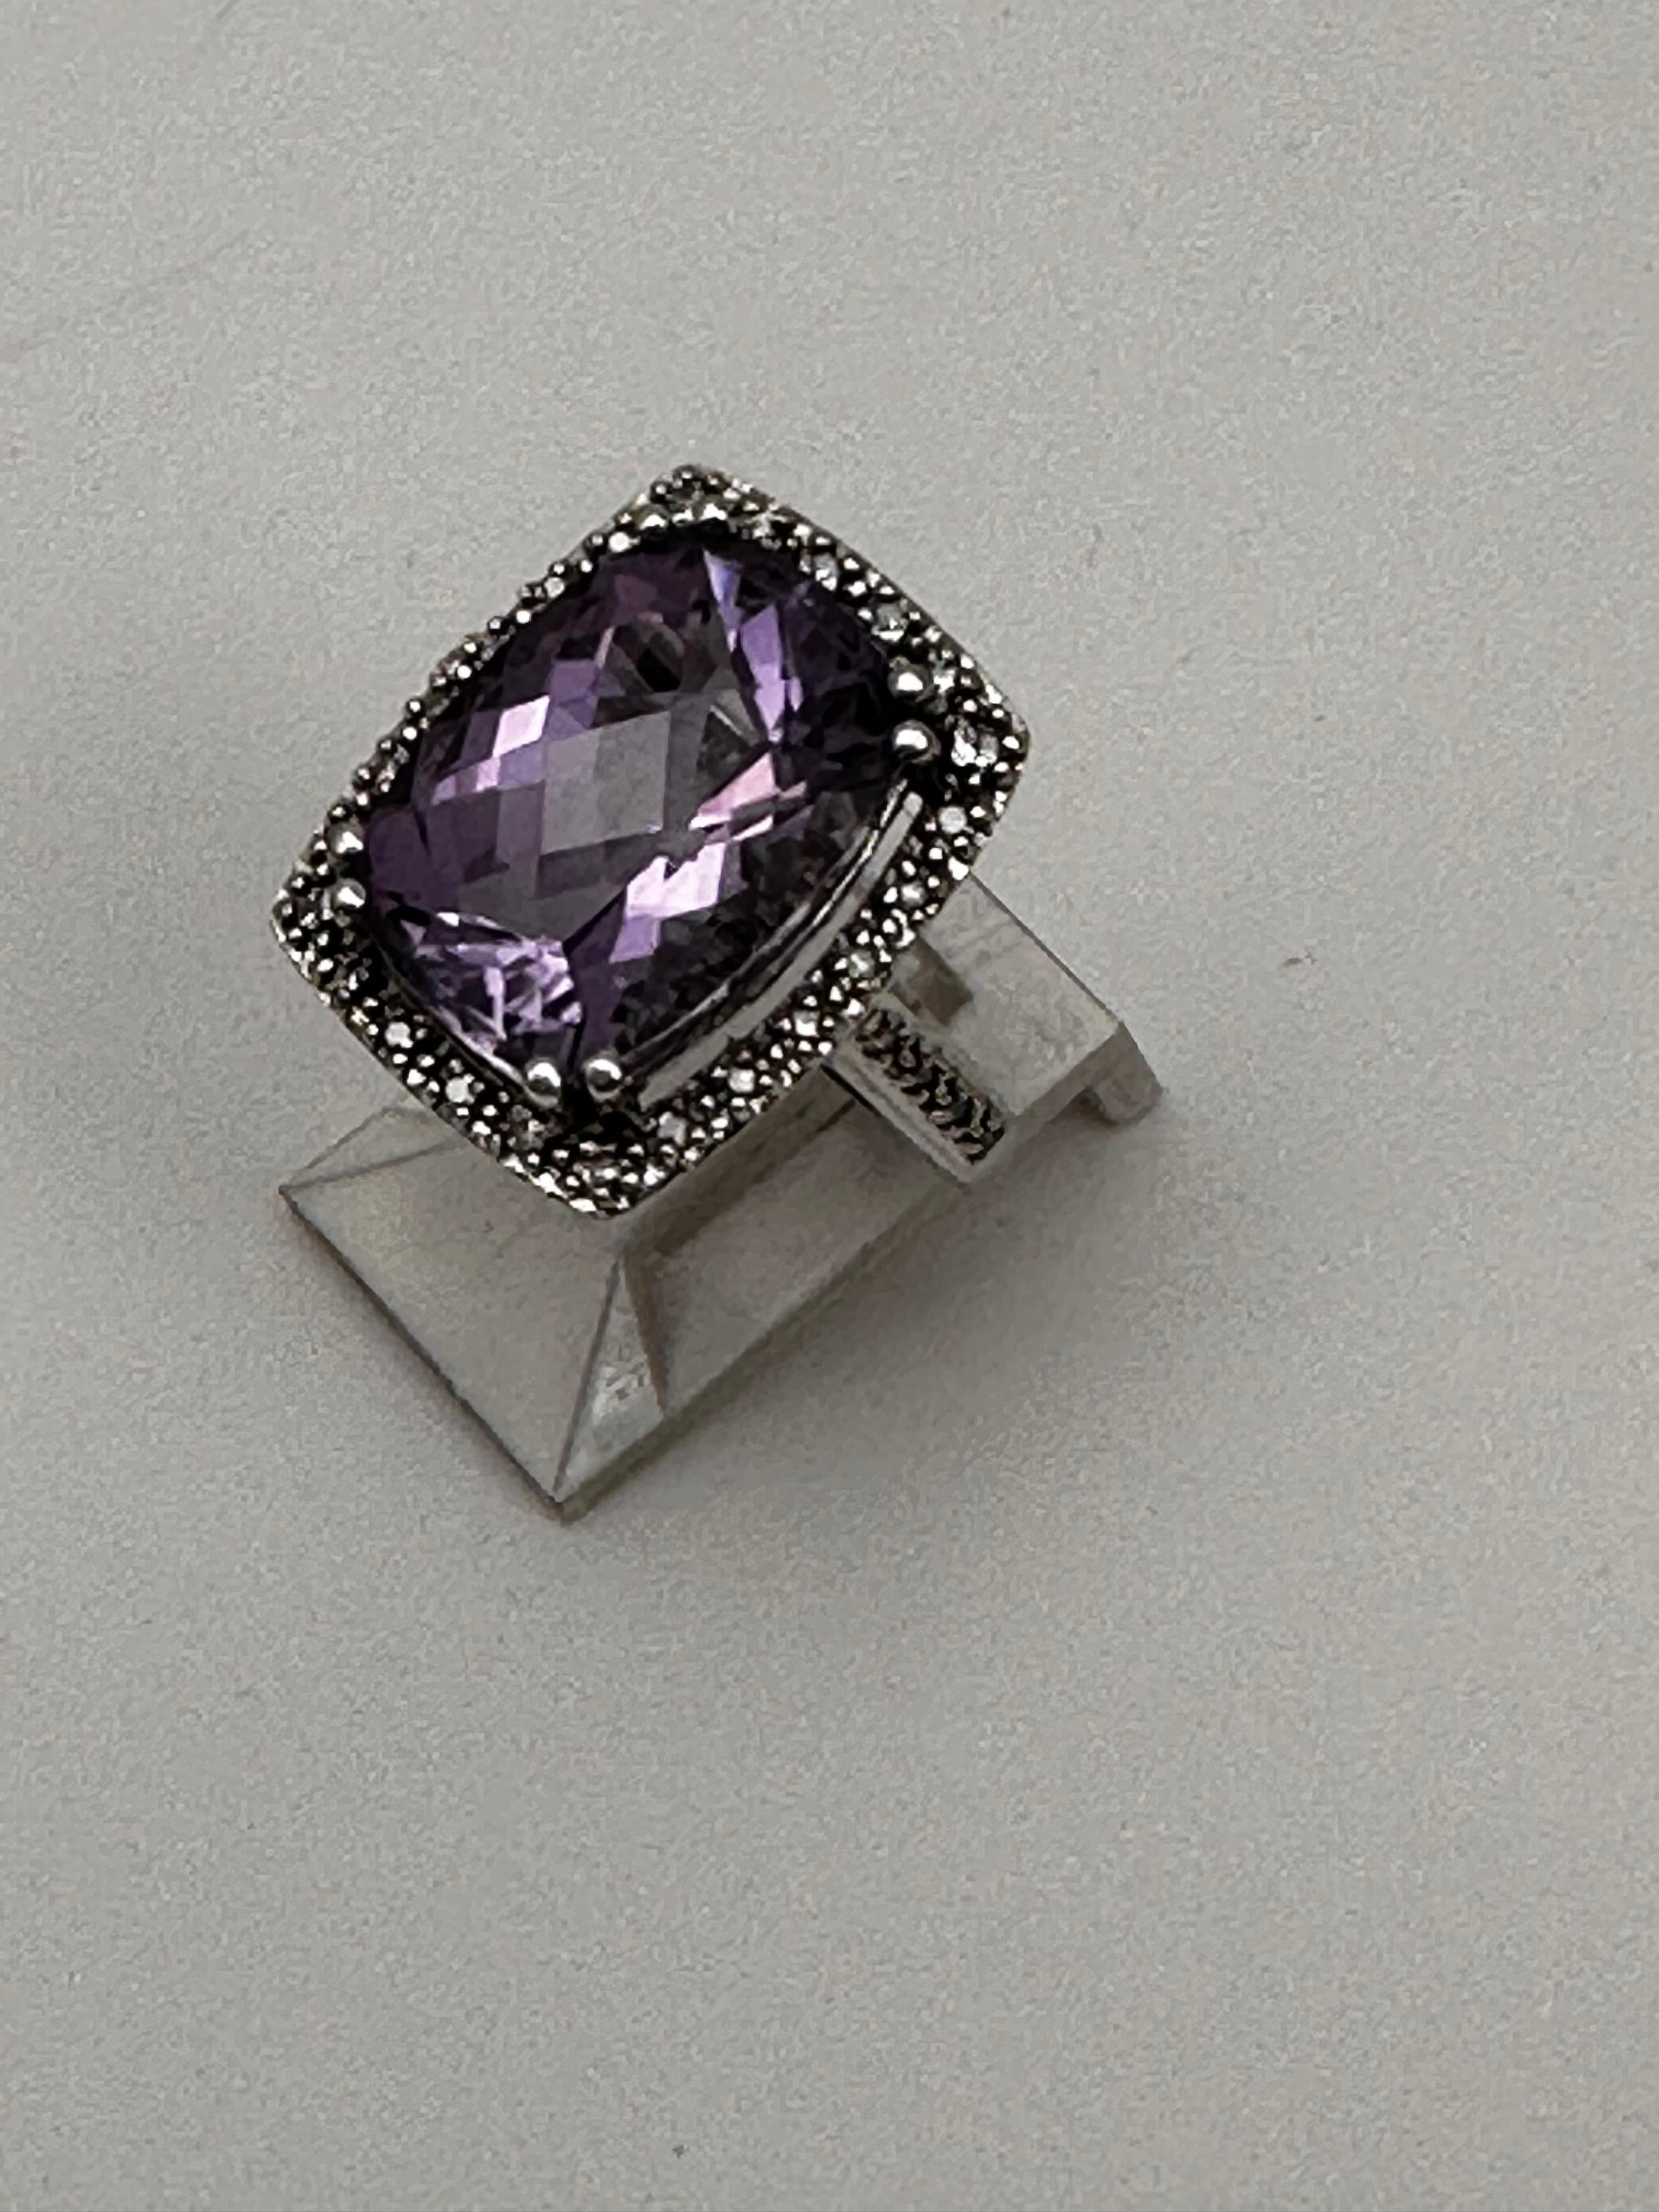 10kt White Gold 11mm x 15mm Cushion Cut Amethyst and Diamond Ring Size 6 3/4 In New Condition For Sale In Las Vegas, NV